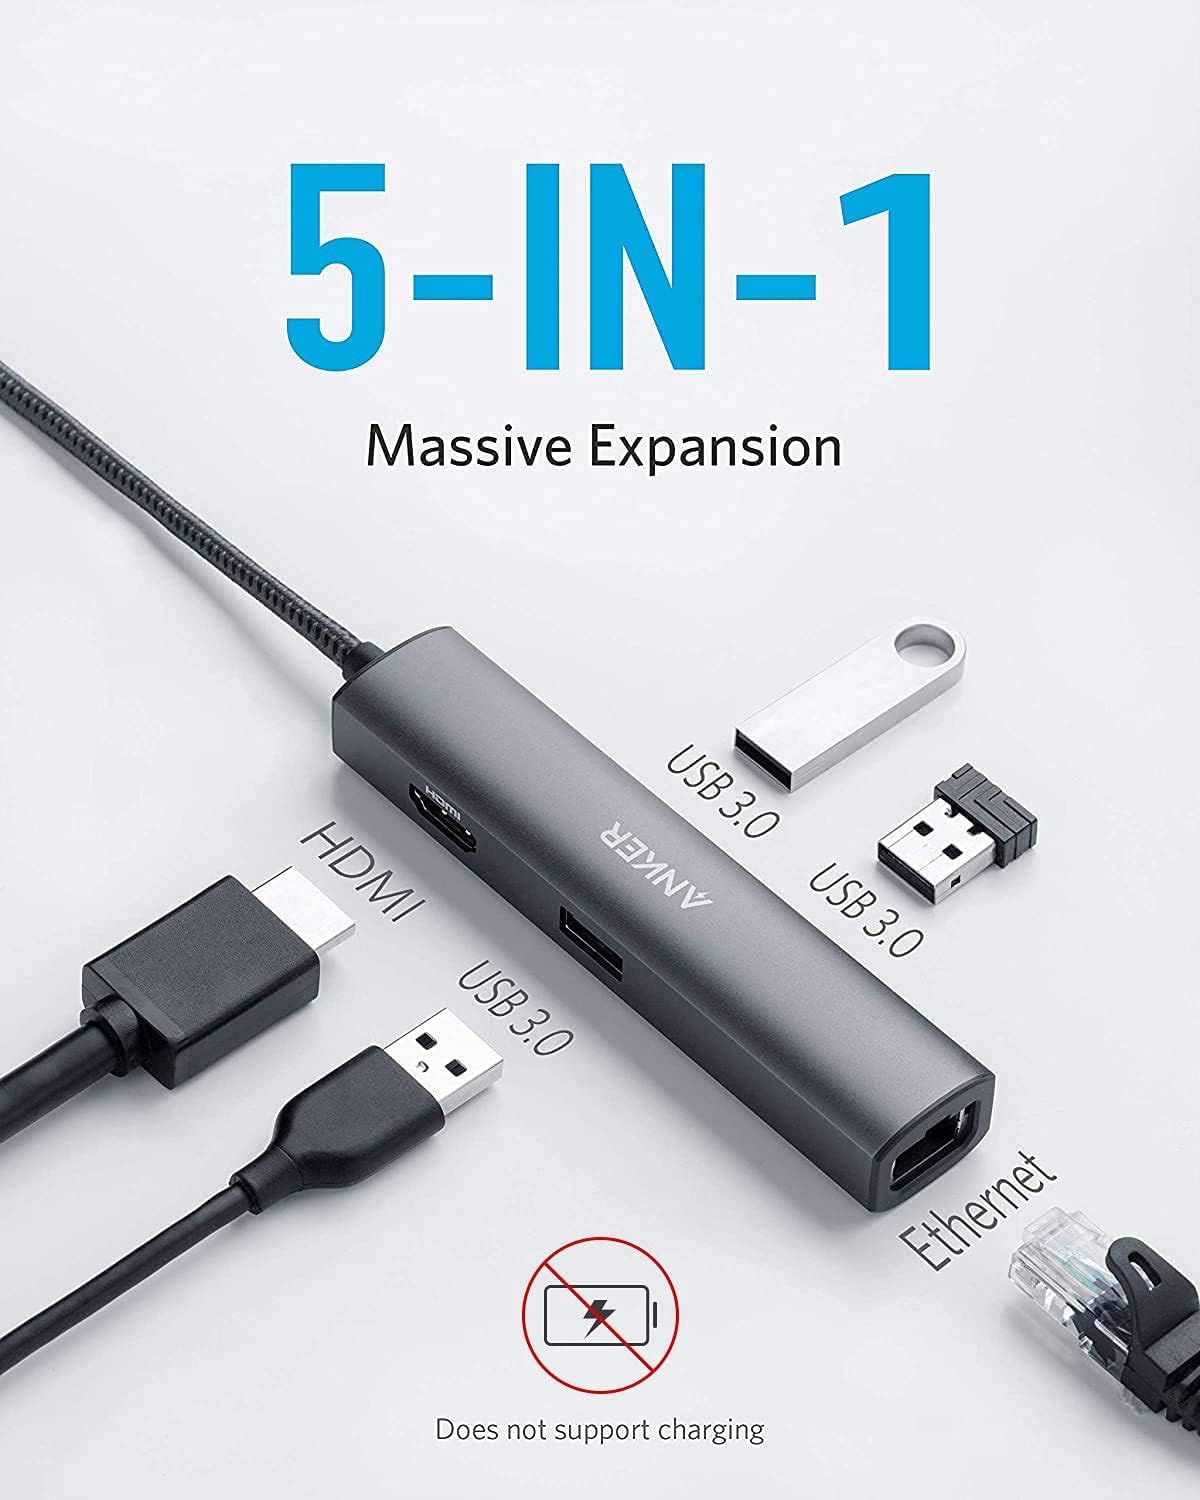 Anker Hub Adapter, 5-in-1 Adapter with 4K USB C to HDMI, Ethernet Port, 3 USB 3.0 Ports, for MacBook Pro, iPad Pro, XPS, Pixelbook, and More